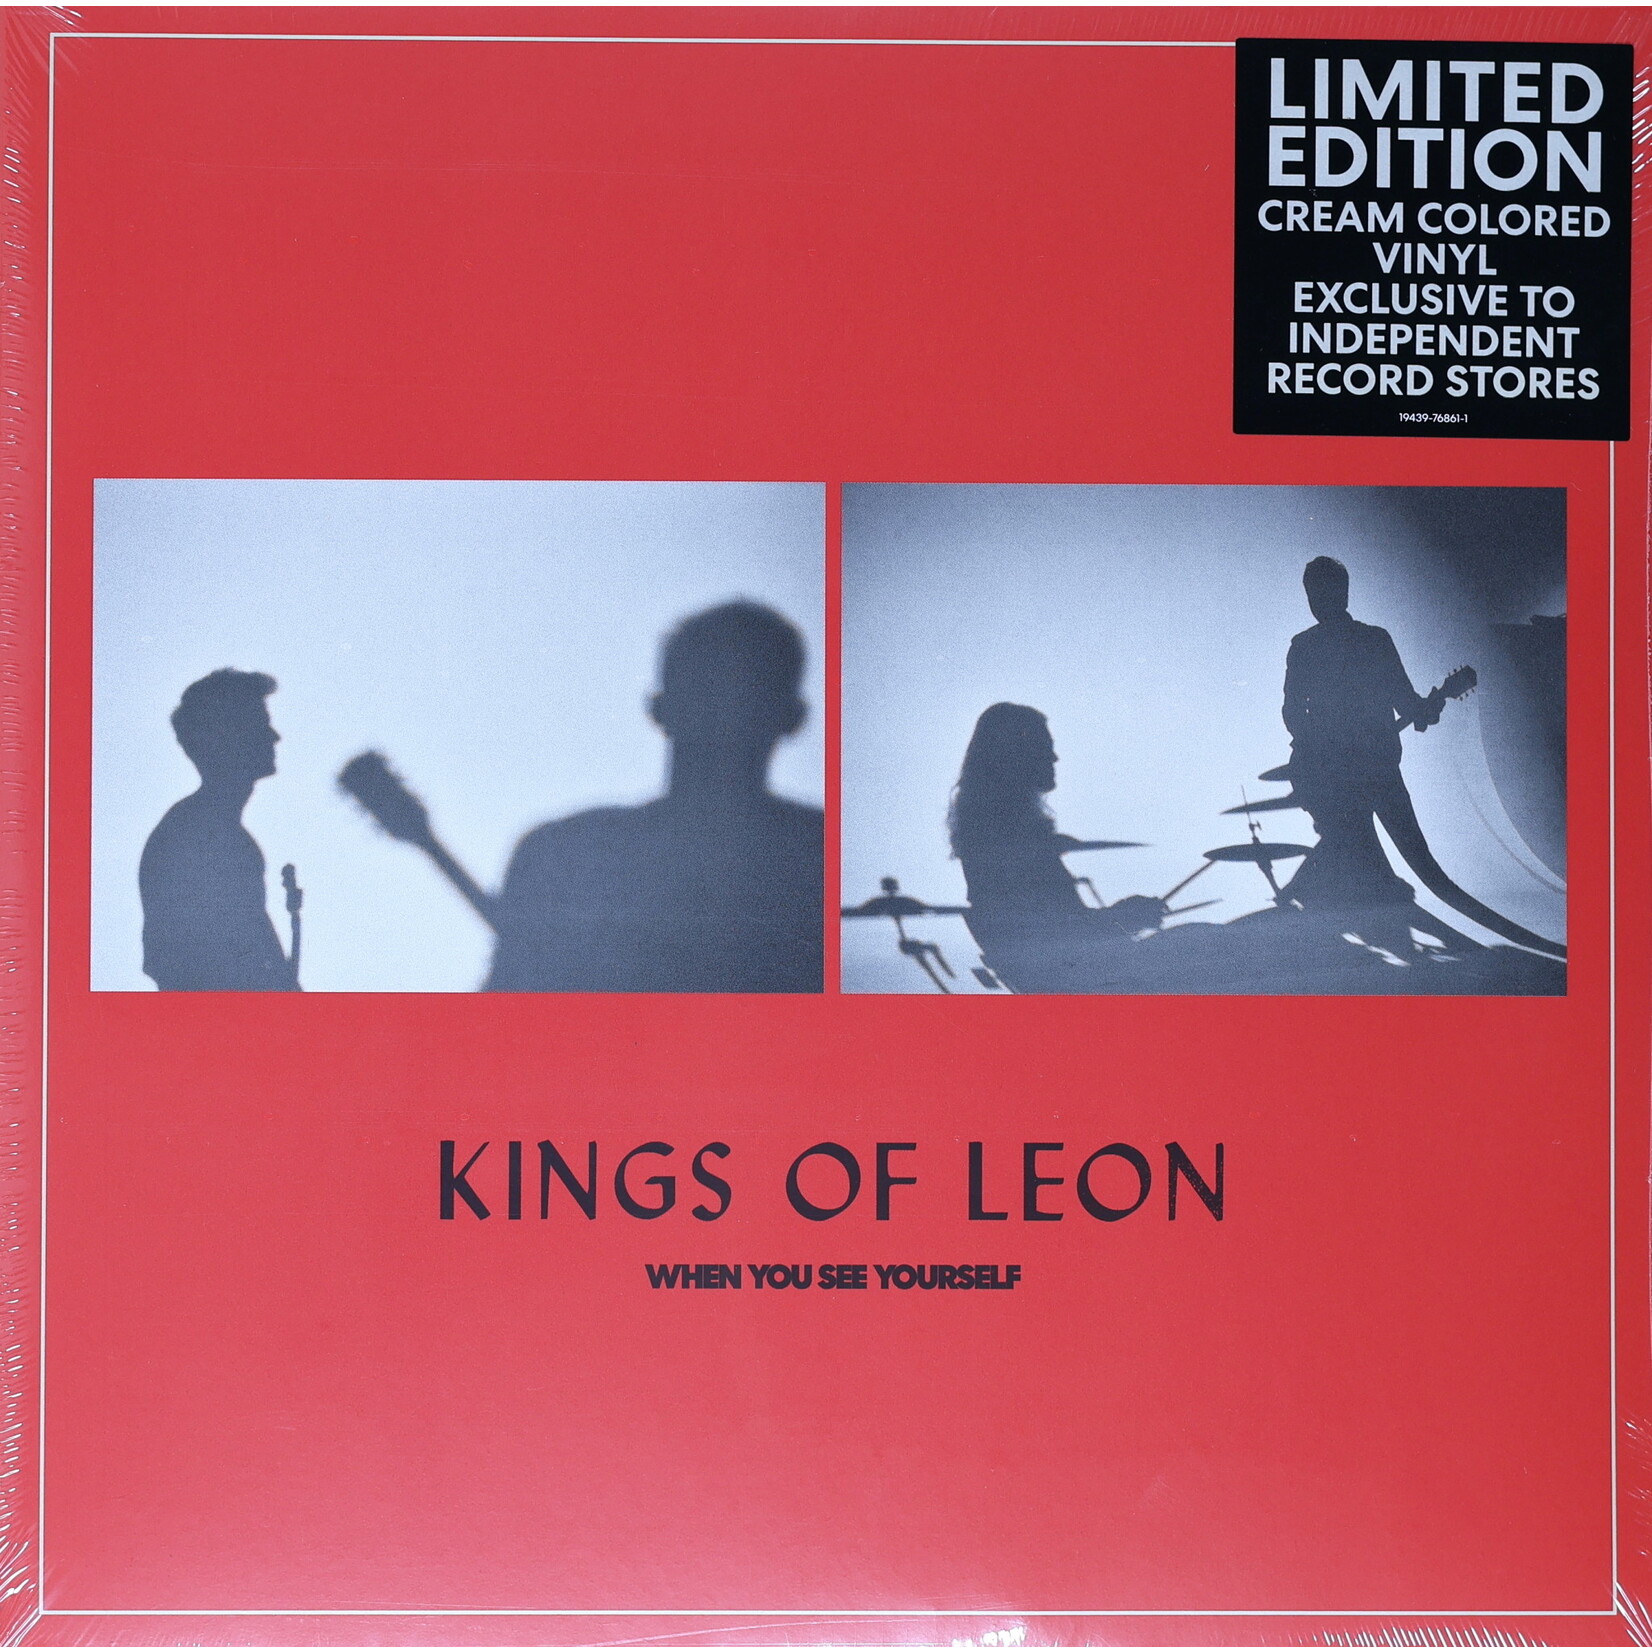 KINGS OF LEON - WHEN YOU SEE YOURSELF - LTD GATEFOLD COLORED CREAM 2LP